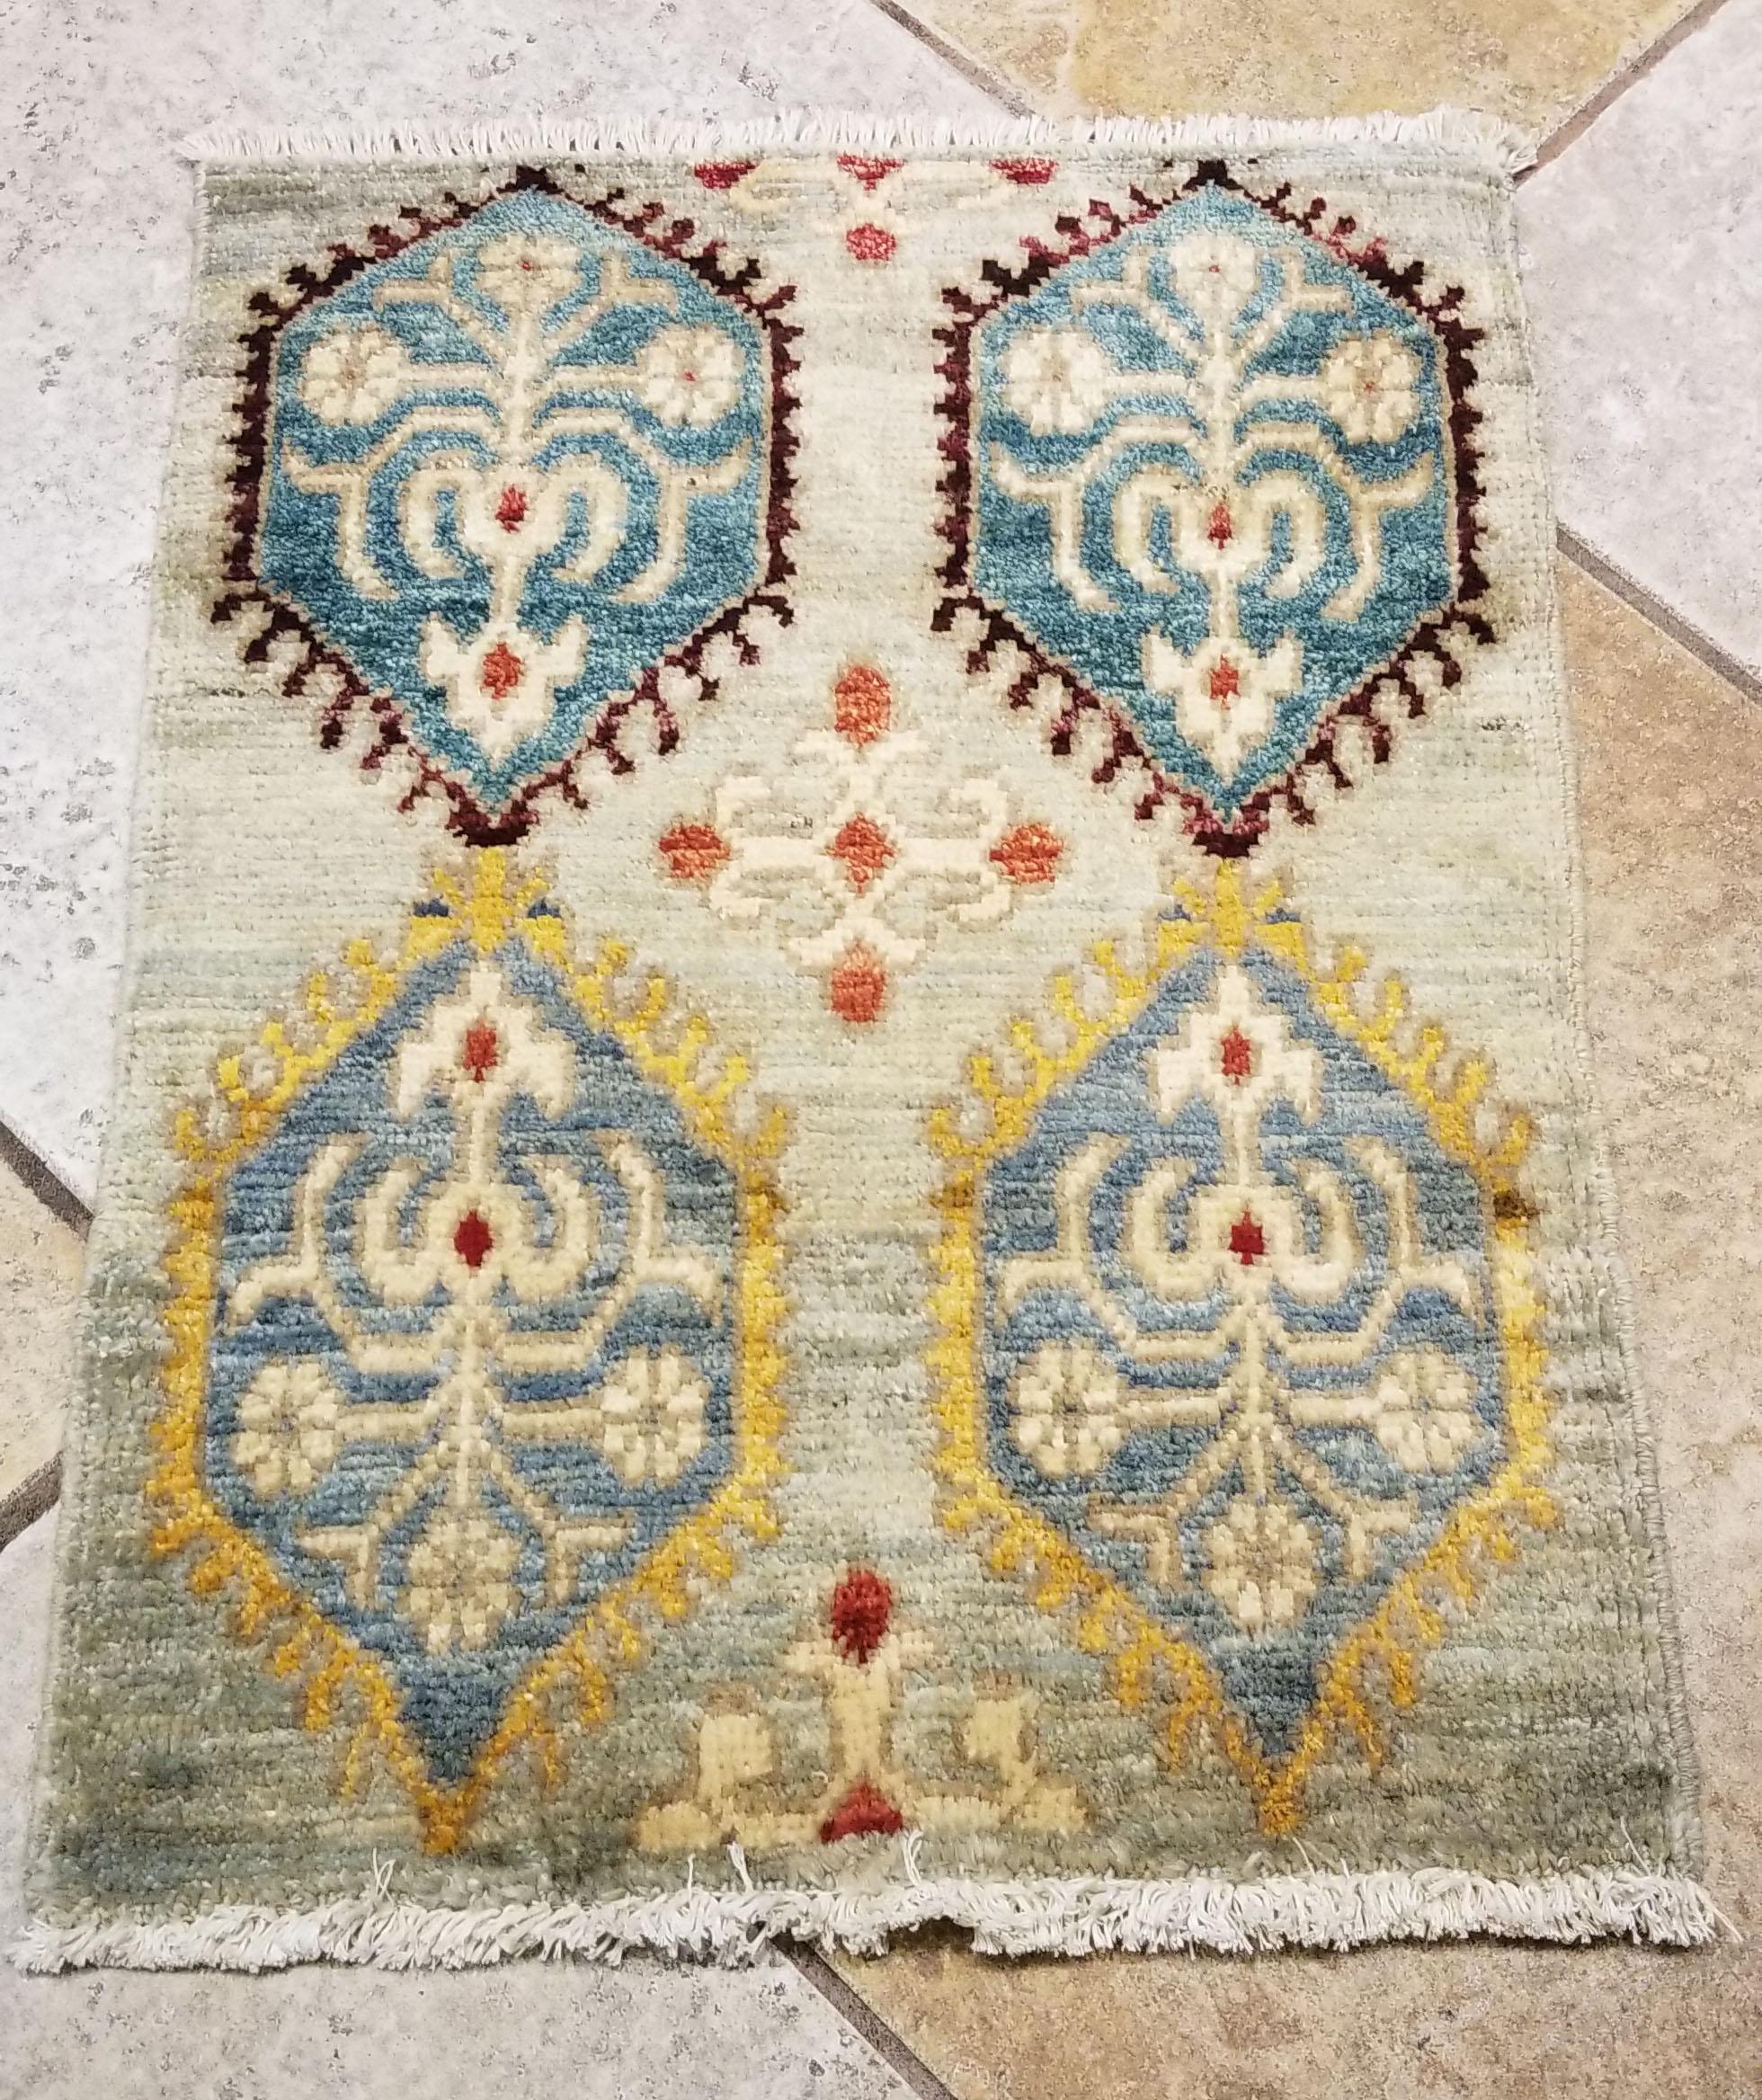 We carry some of the best Afghan bedside rugs, when you like to give your bedroom a colorful new look with one of our stunning carpets. This one measures approximately 24